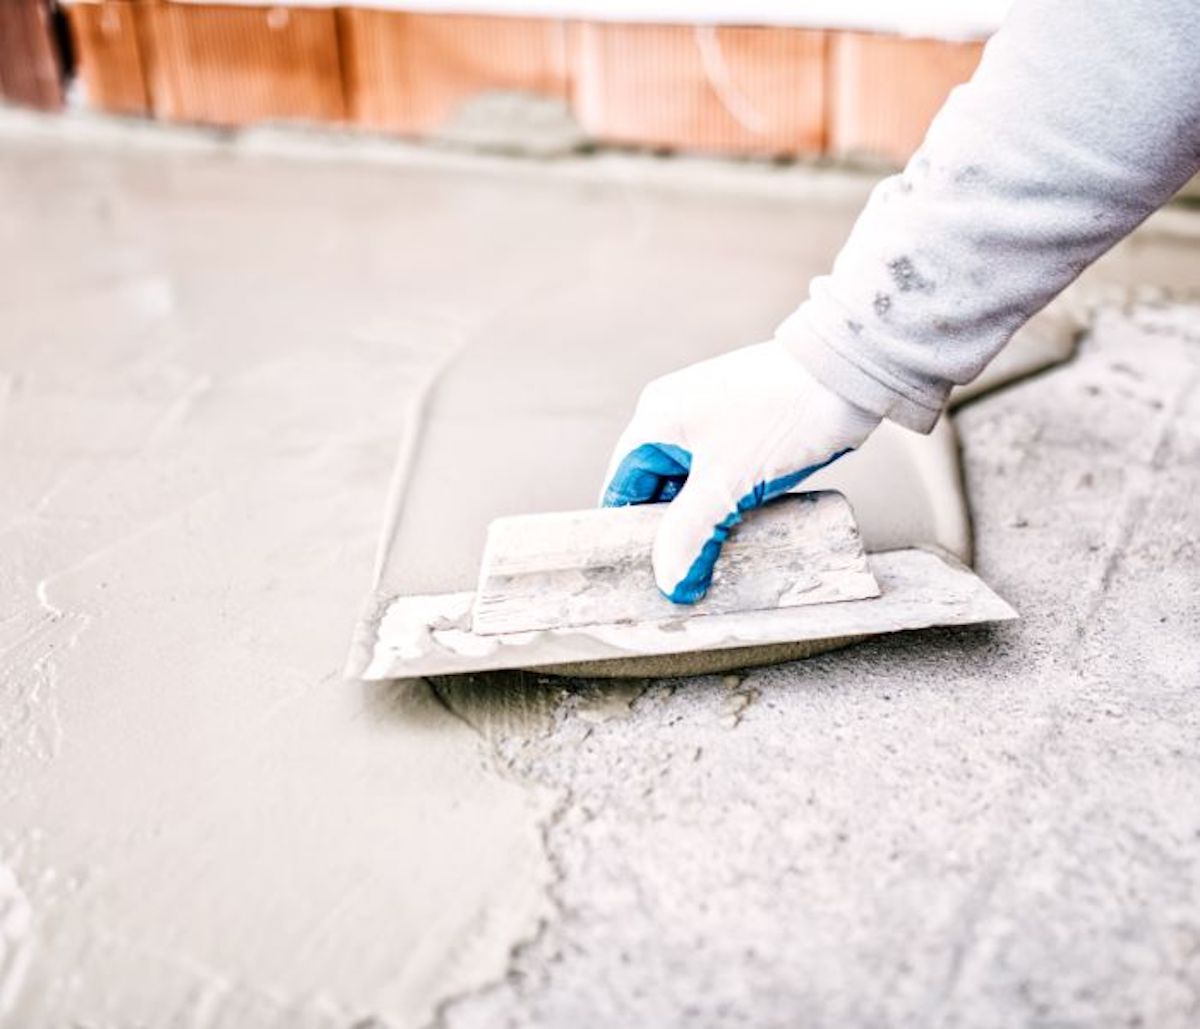 House leveling is a complicated process. There is no harm in understanding the basics of why and how you must level a house. Here's our go-to guide.